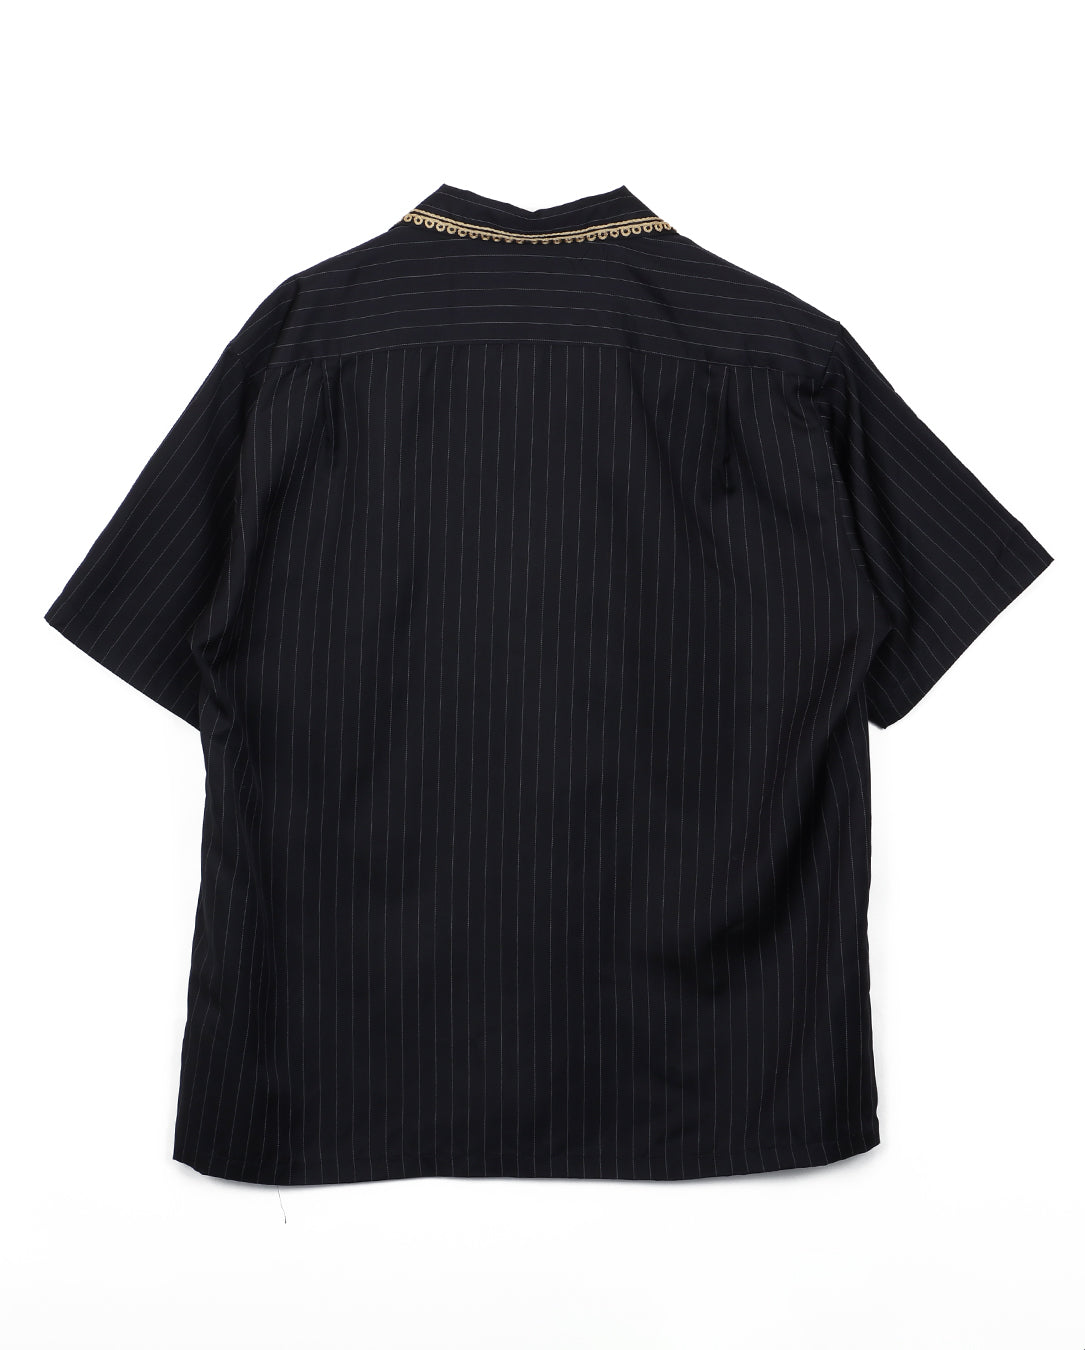 Stripe Fabric Embroidered Open Collar Shirt navy